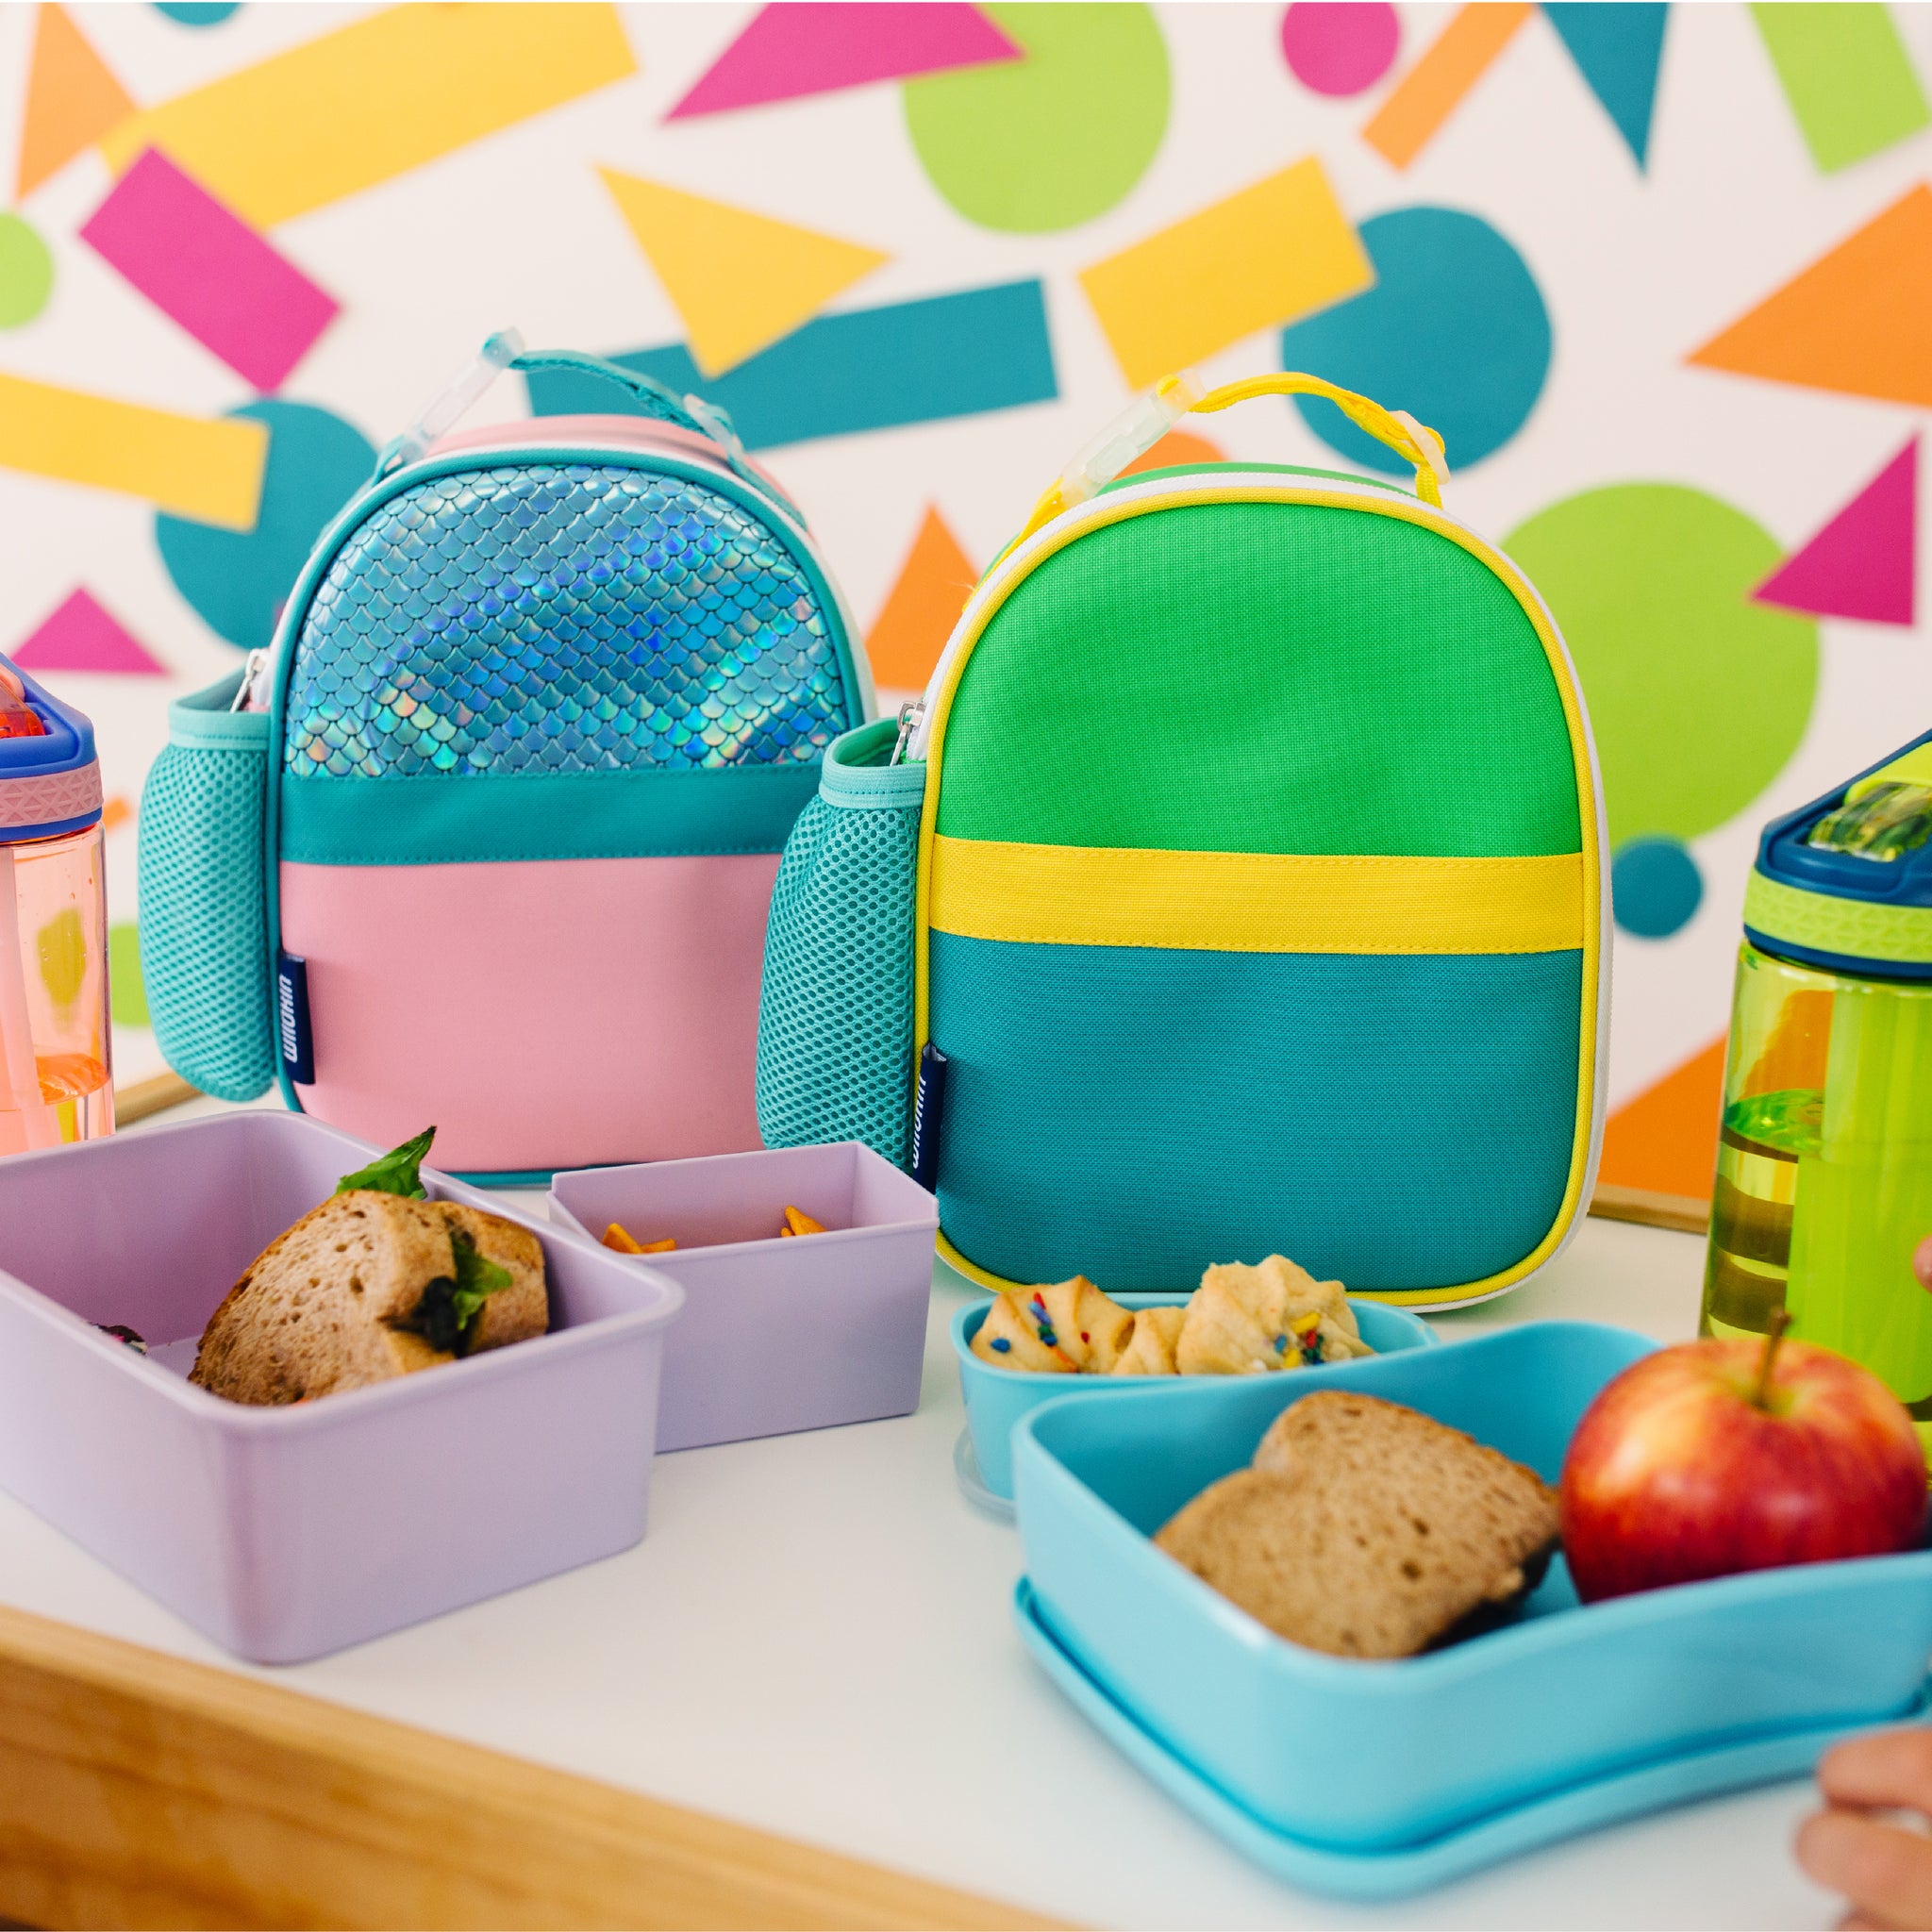 Kids Tiffin Lunch Box with Insulated Lunch Box Cover, Mint Green - Little  Surprise Box